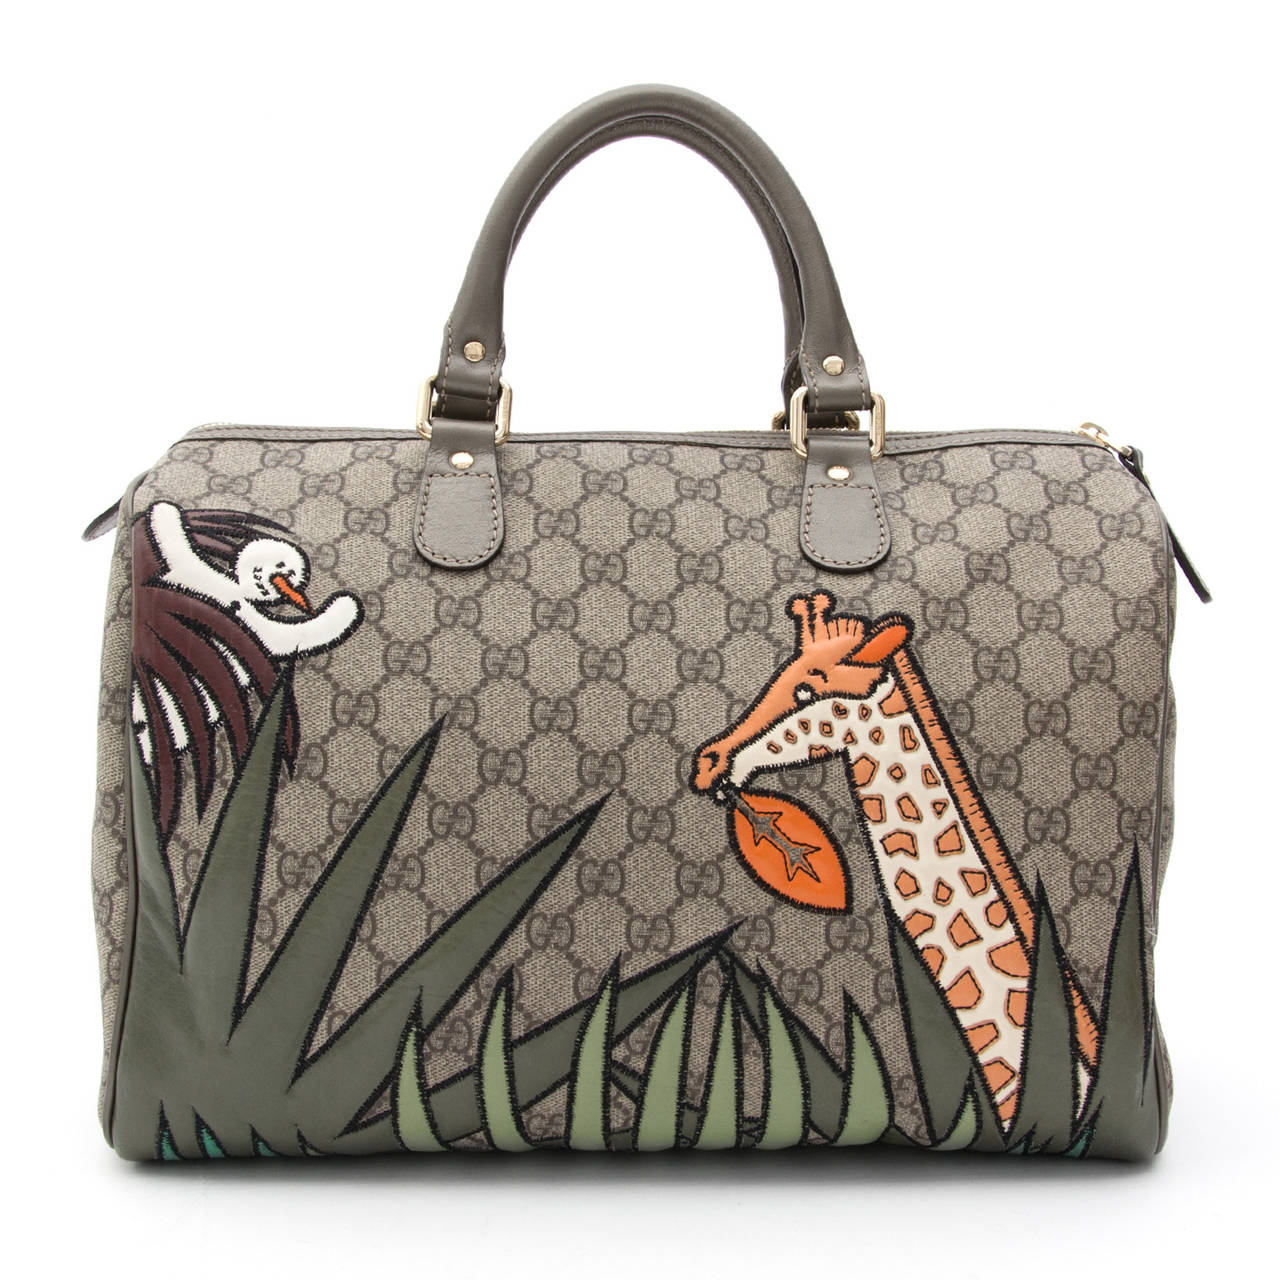 Gucci collector's item and limited edition for UNICEF in 2009. Heidi Klum and Jessica Parker are seen with this bag!